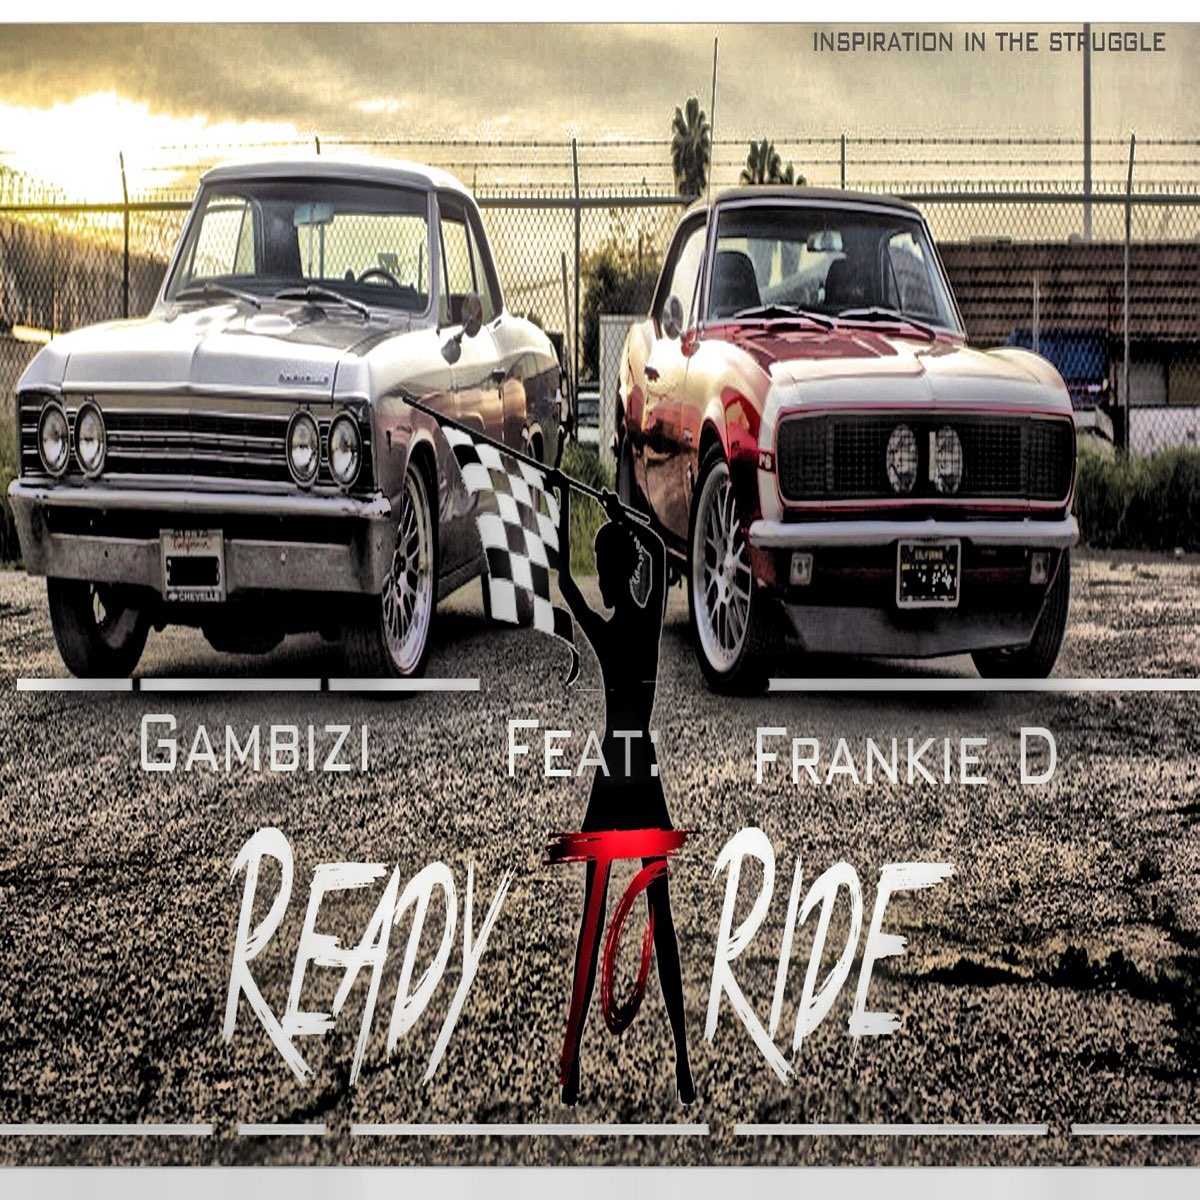 Frankie d. Ready to Ride. Look at the World (feat. Javad) - Single. Feat riders